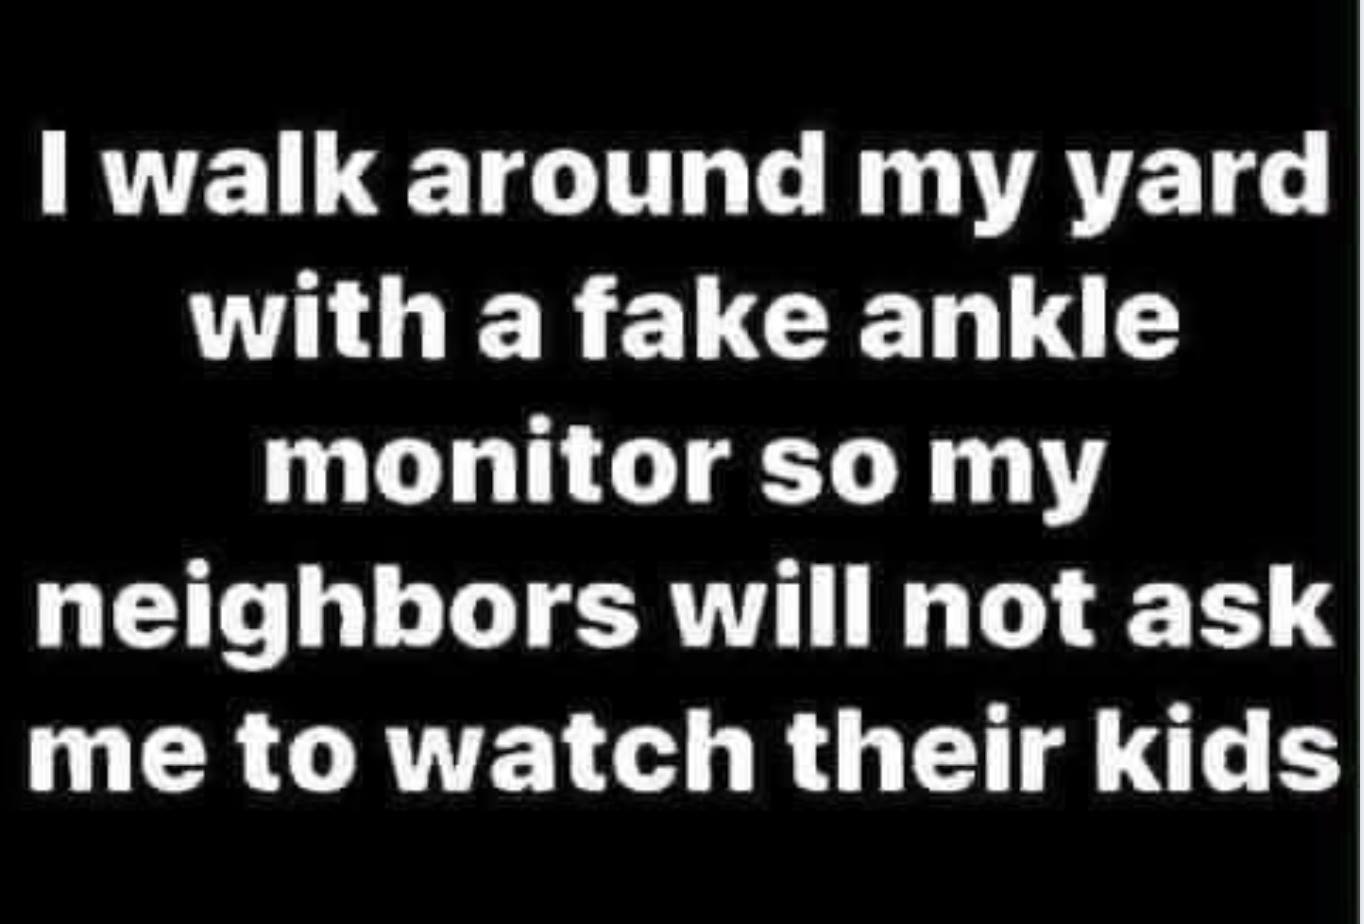 monochrome - I walk around my yard with a fake ankle monitor so my neighbors will not ask me to watch their kids